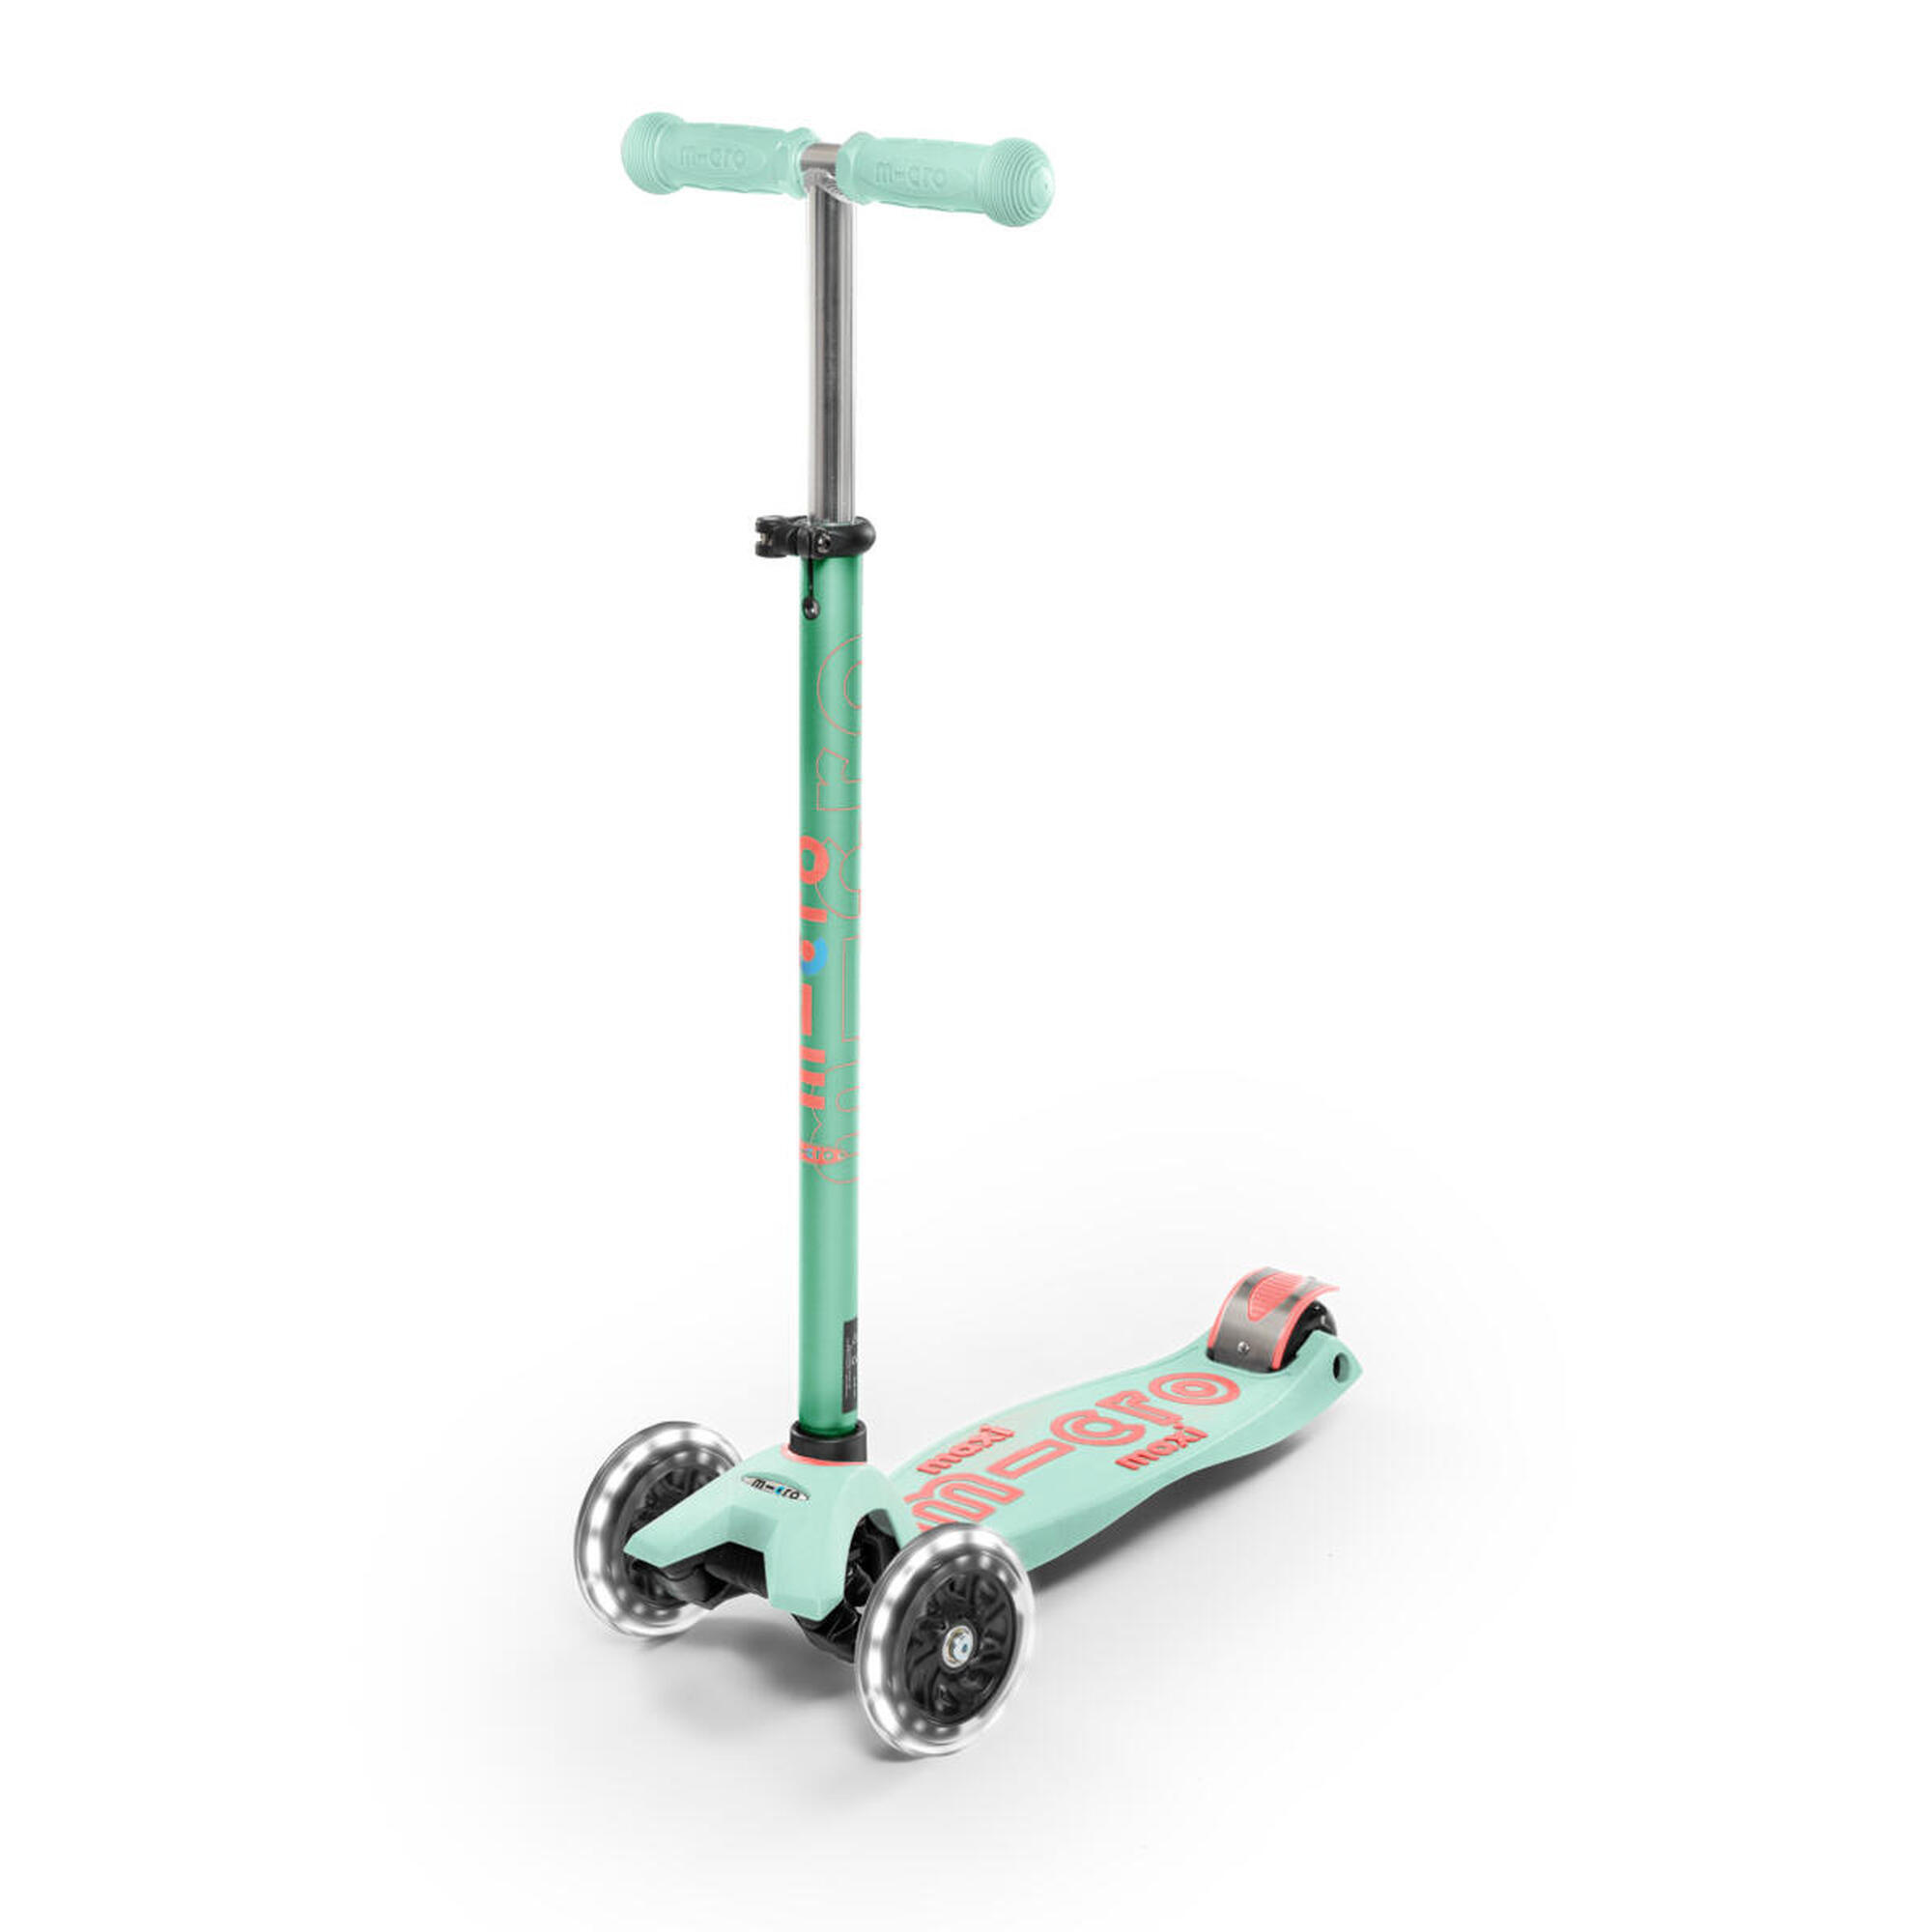 MICRO Maxi Scooter - Light up Wheels: Mint